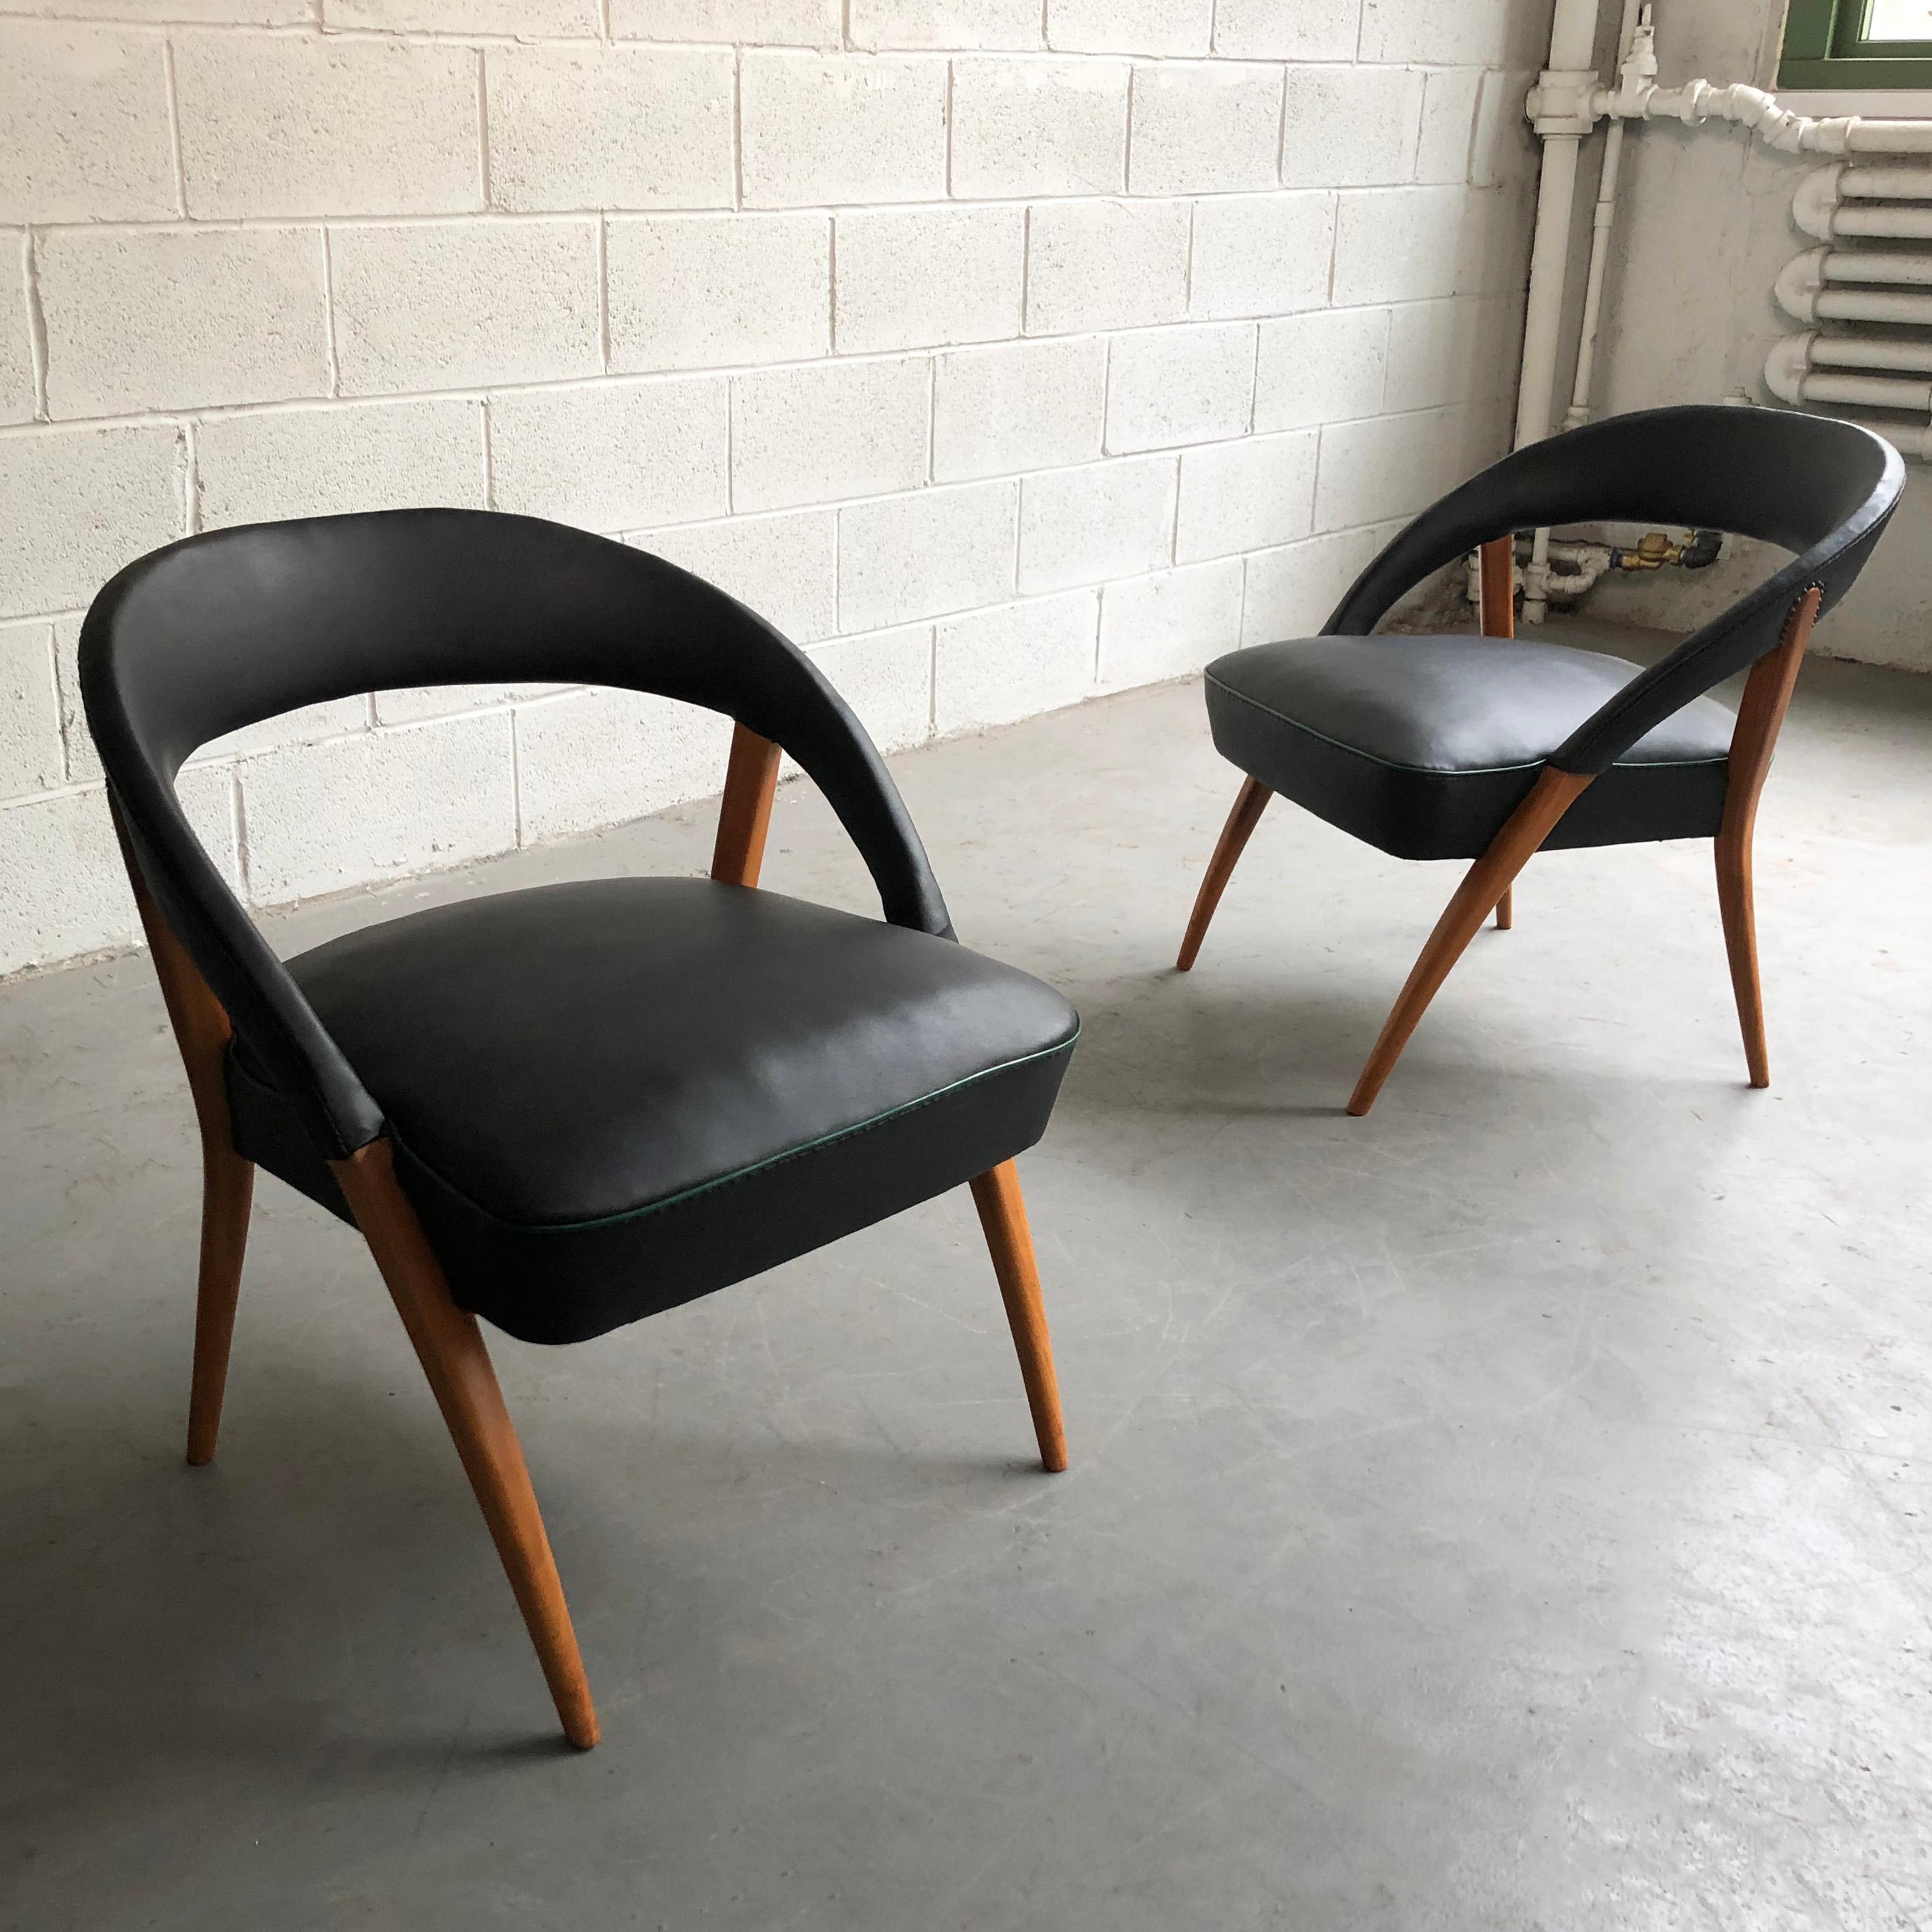 Pair of Italian, Mid-Century Modern, lounge chairs feature wonderfully shaped maple frames with rounded backs upholstered in black vinyl with green piping.